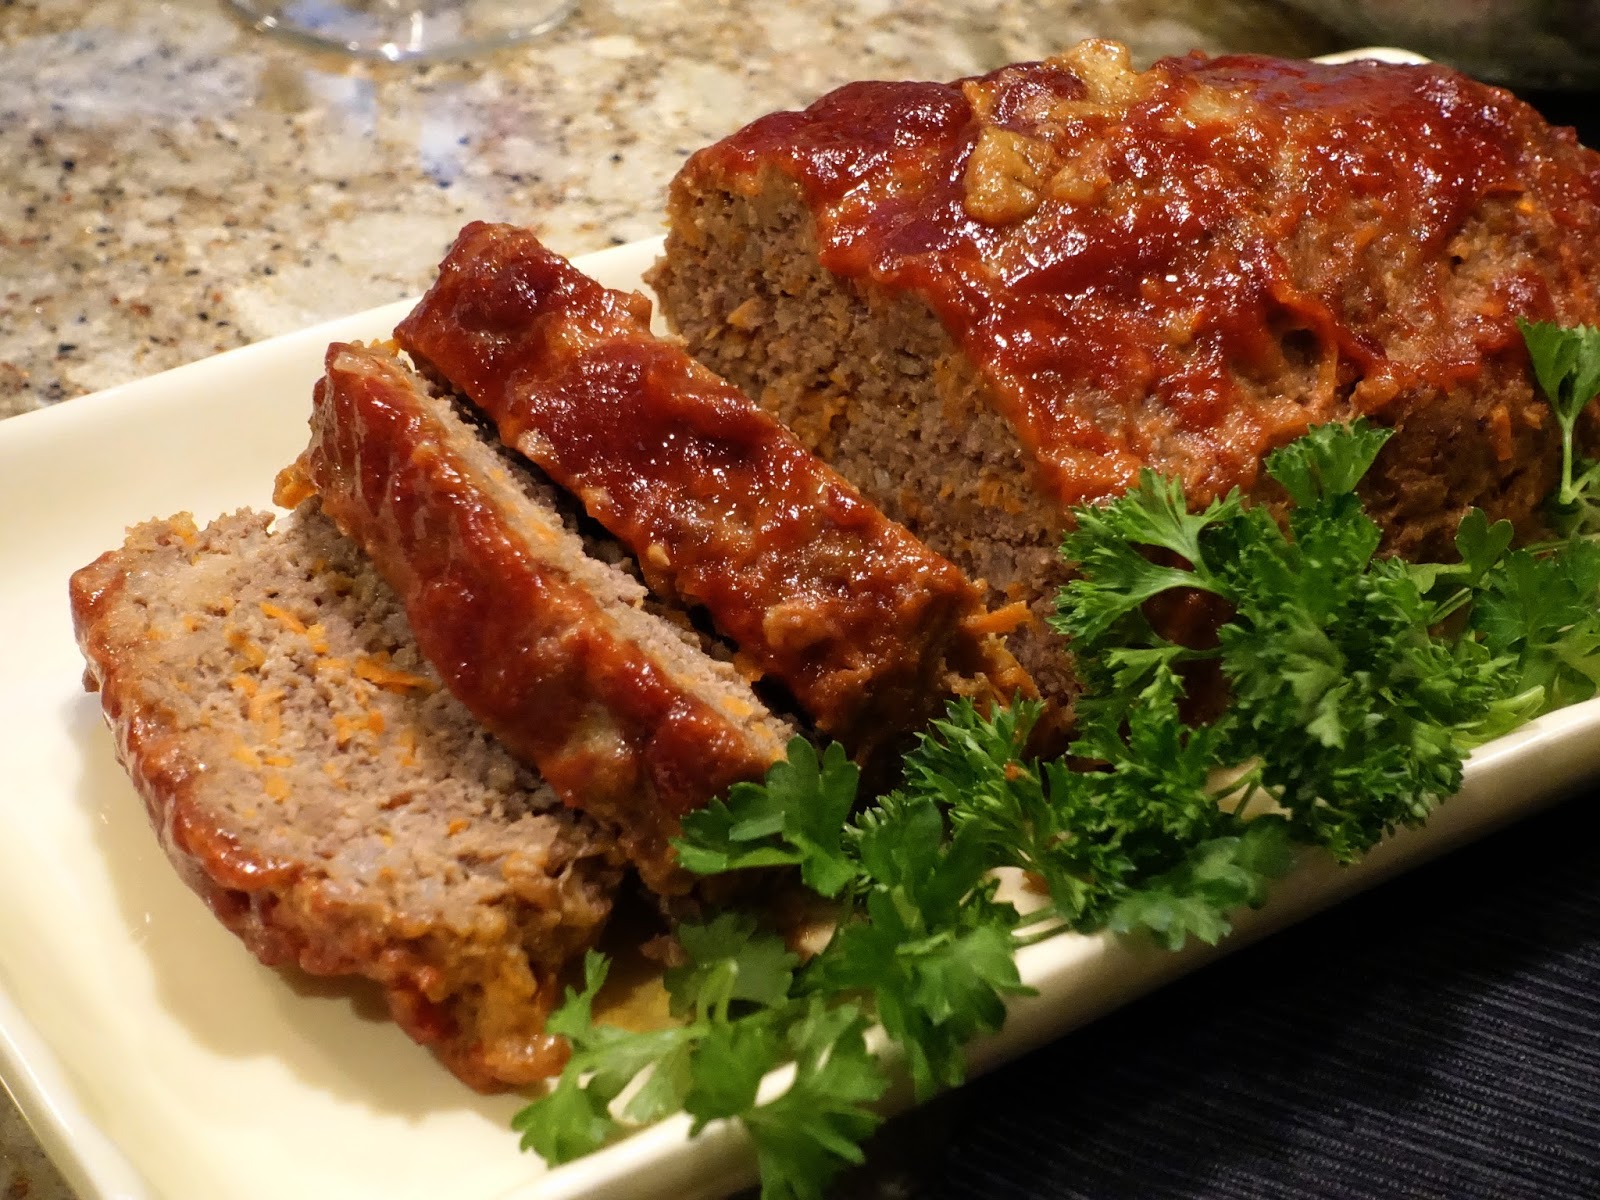 how long to cook meatloaf at 375?